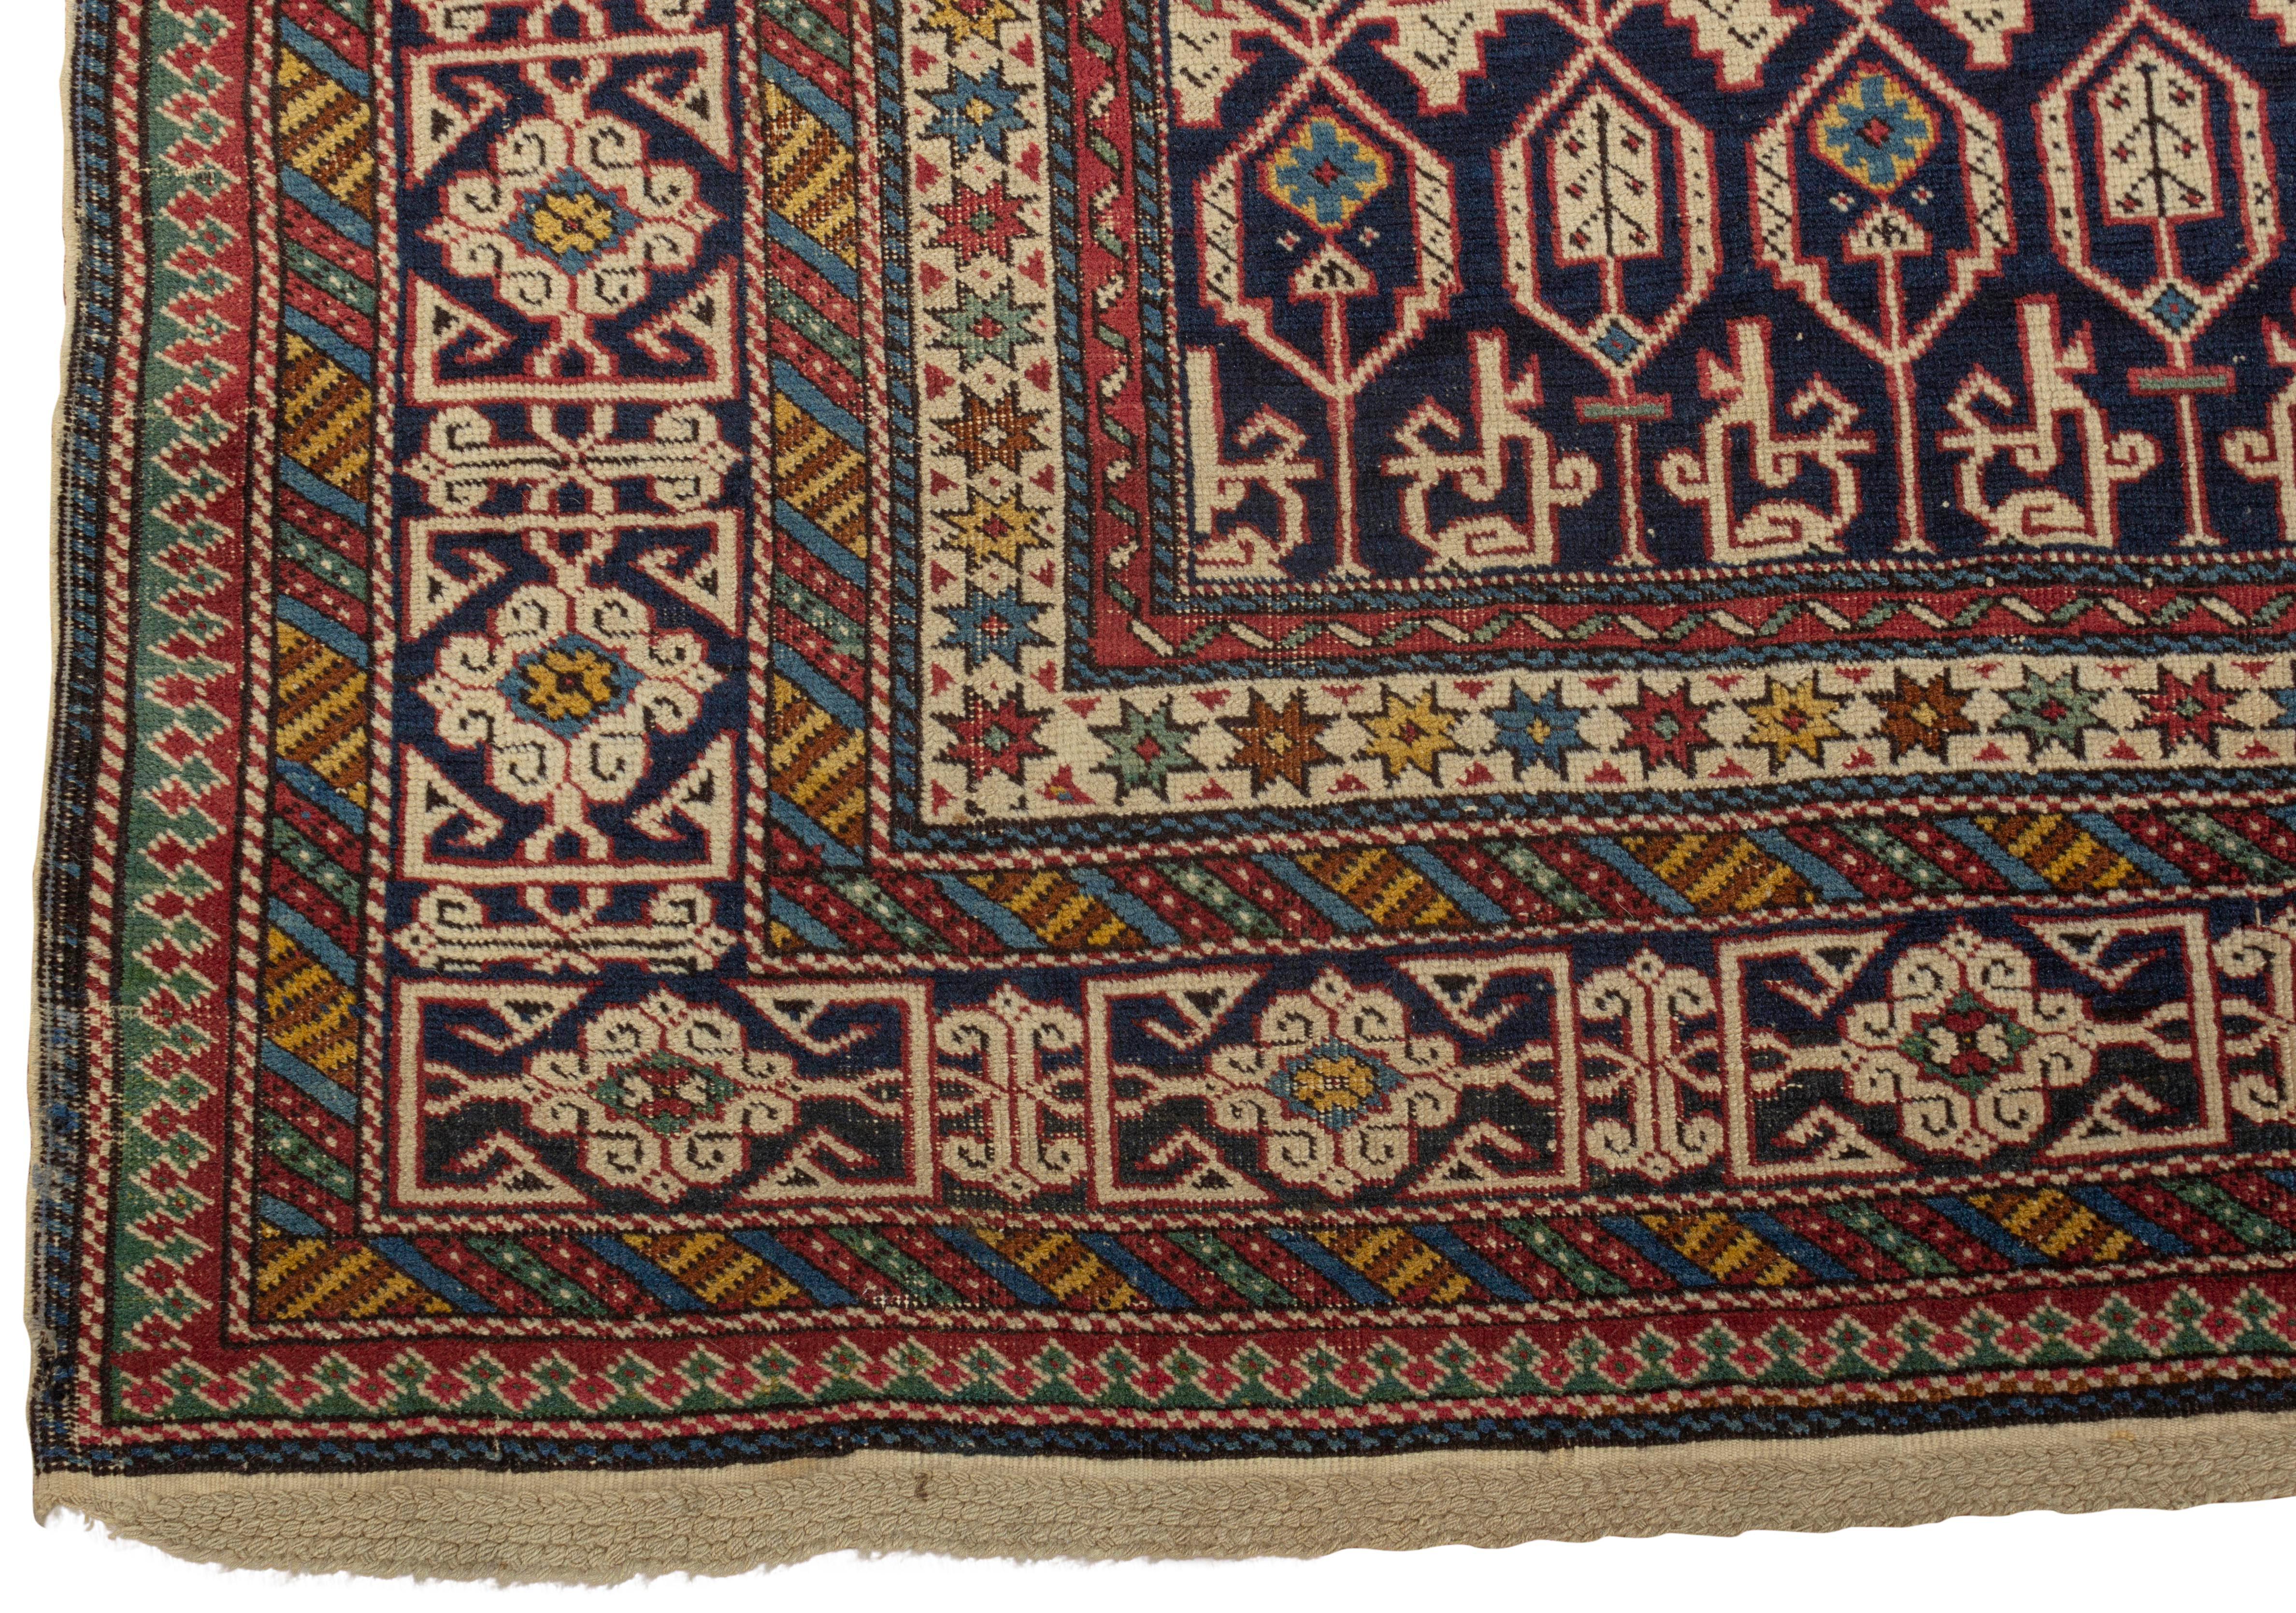 Antique Caucasian Konagkend Kuba rug, circa 1890. Konagkend is about 20 miles south of Kuba in the Caucasus Mountains, between Persia and Russia and are justly famous for their scatter rugs and this is a fine example, the central navy field filled